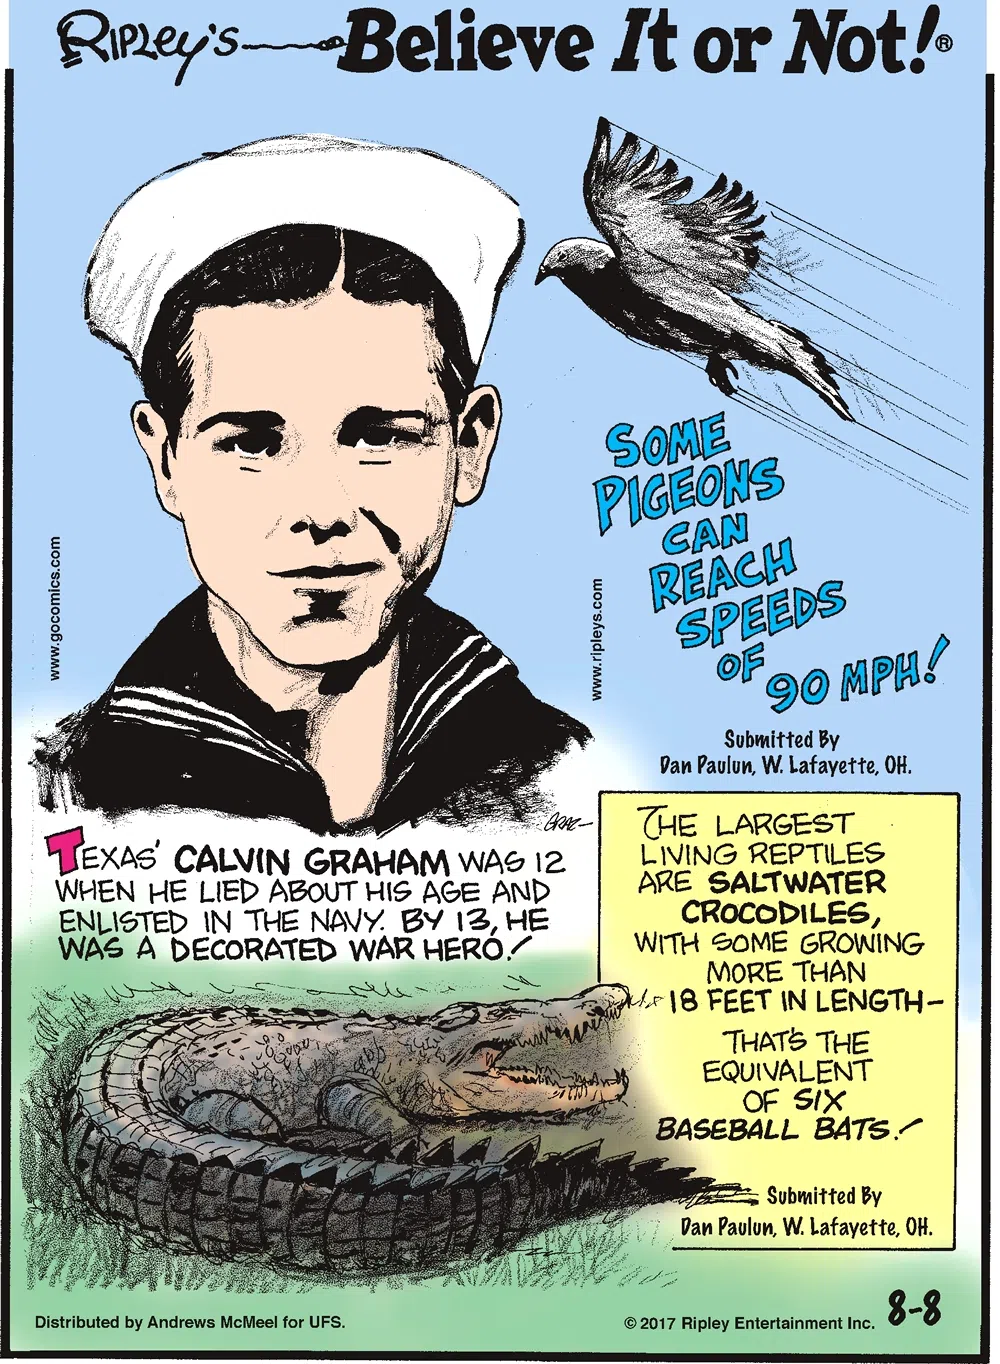 Some pigeons can reach speeds of 90 mph! Submitted by Dan Paulun, W. Lafayette, OH.-------------------- Texas' Calvin Graham was 12 when he lied about his age and enlisted in the Navy. By 13, he was a decorated war hero!-------------------- The largest living reptiles are saltwater crocodiles, with some growing more than 18 feet in length - that's the equivalent of six baseball bats! Submitted by Dan Paulun, W. Lafayette, OH.